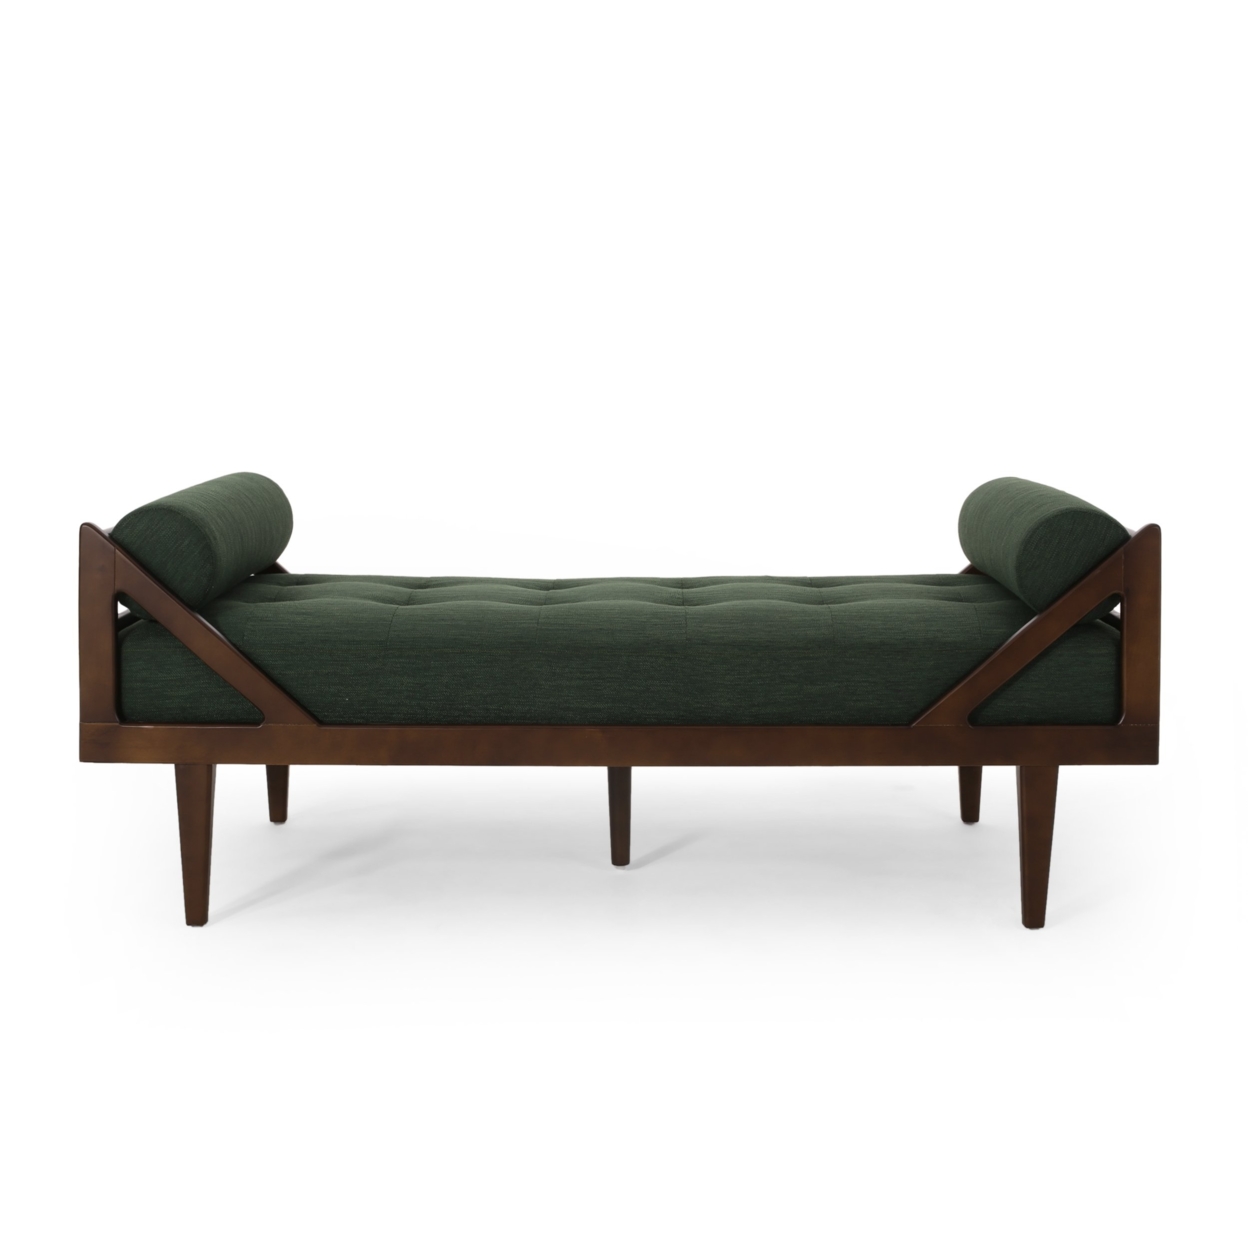 Sumner Contemporary Tufted Chaise Lounge With Rolled Accent Pillows - Dark Brown/charcoal